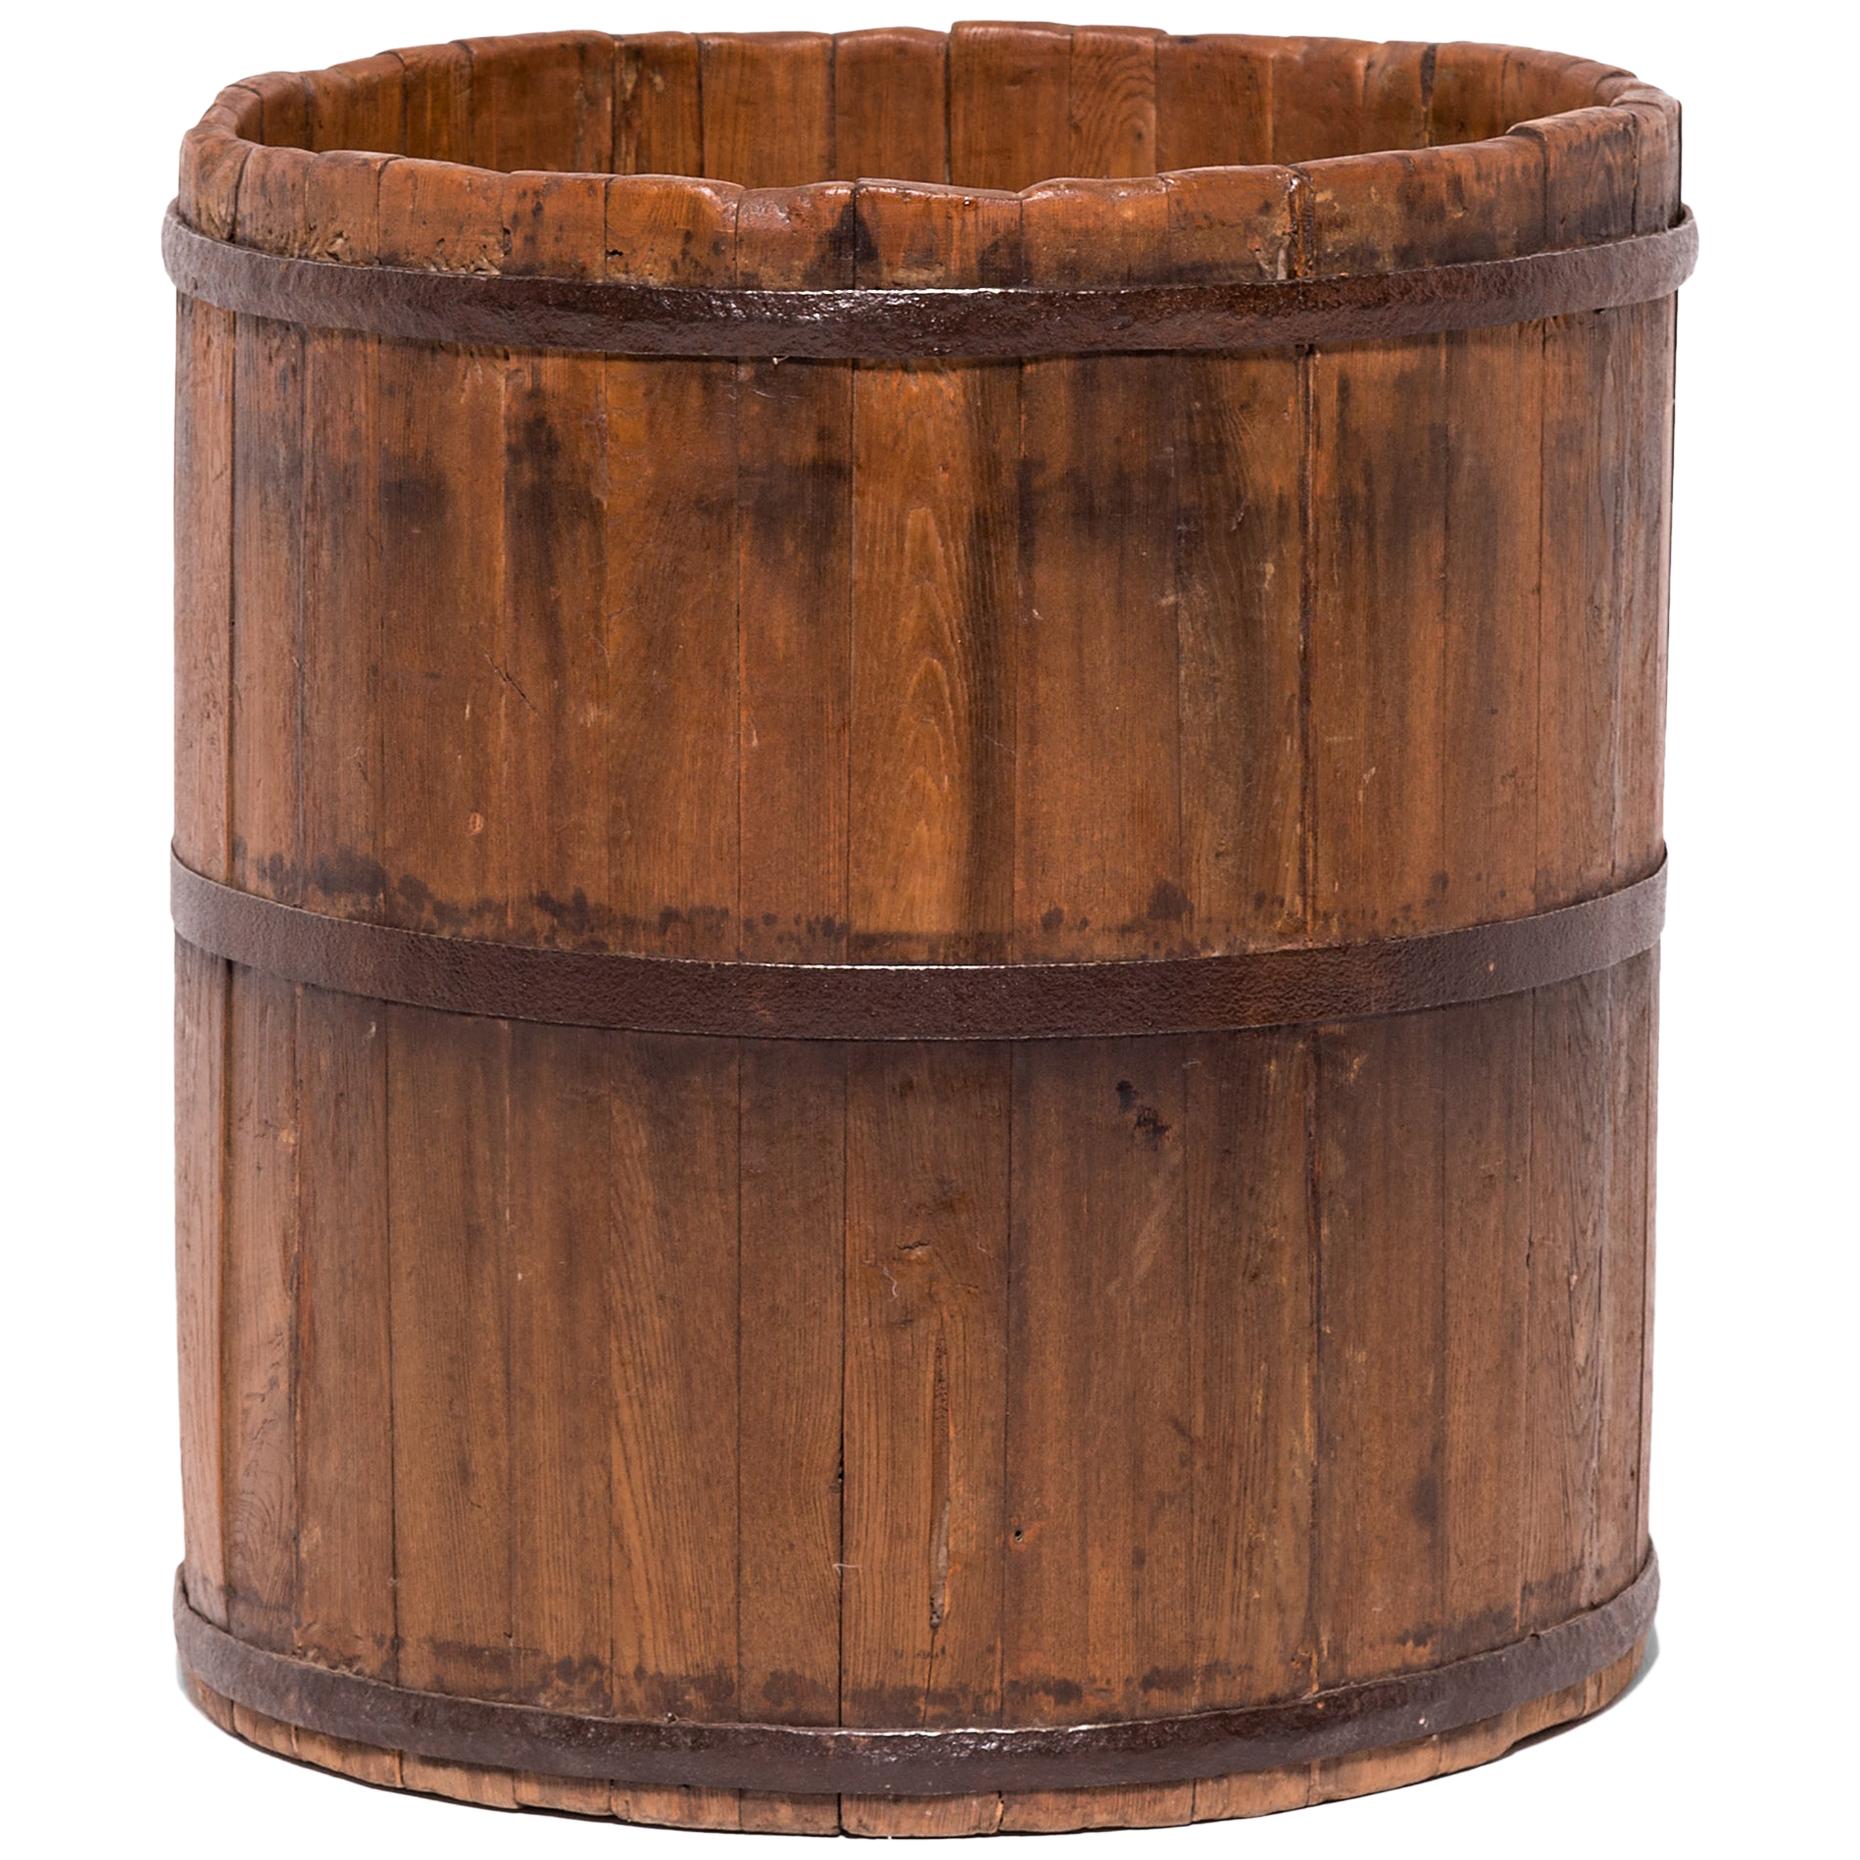 Early 20th Century Chinese Round Water Pail